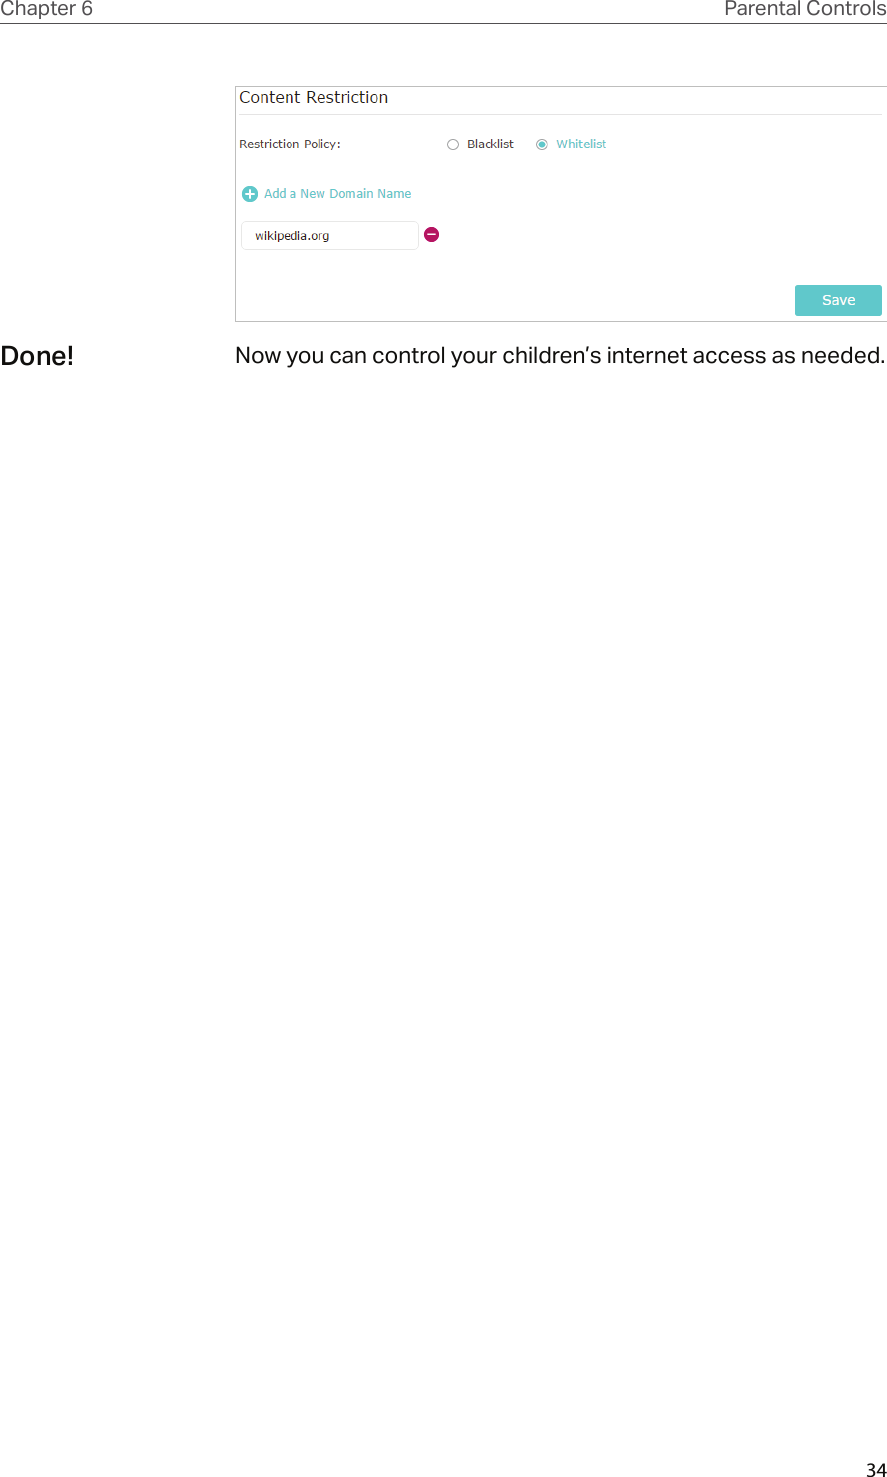 34Chapter 6 Parental ControlsNow you can control your children’s internet access as needed.Done!